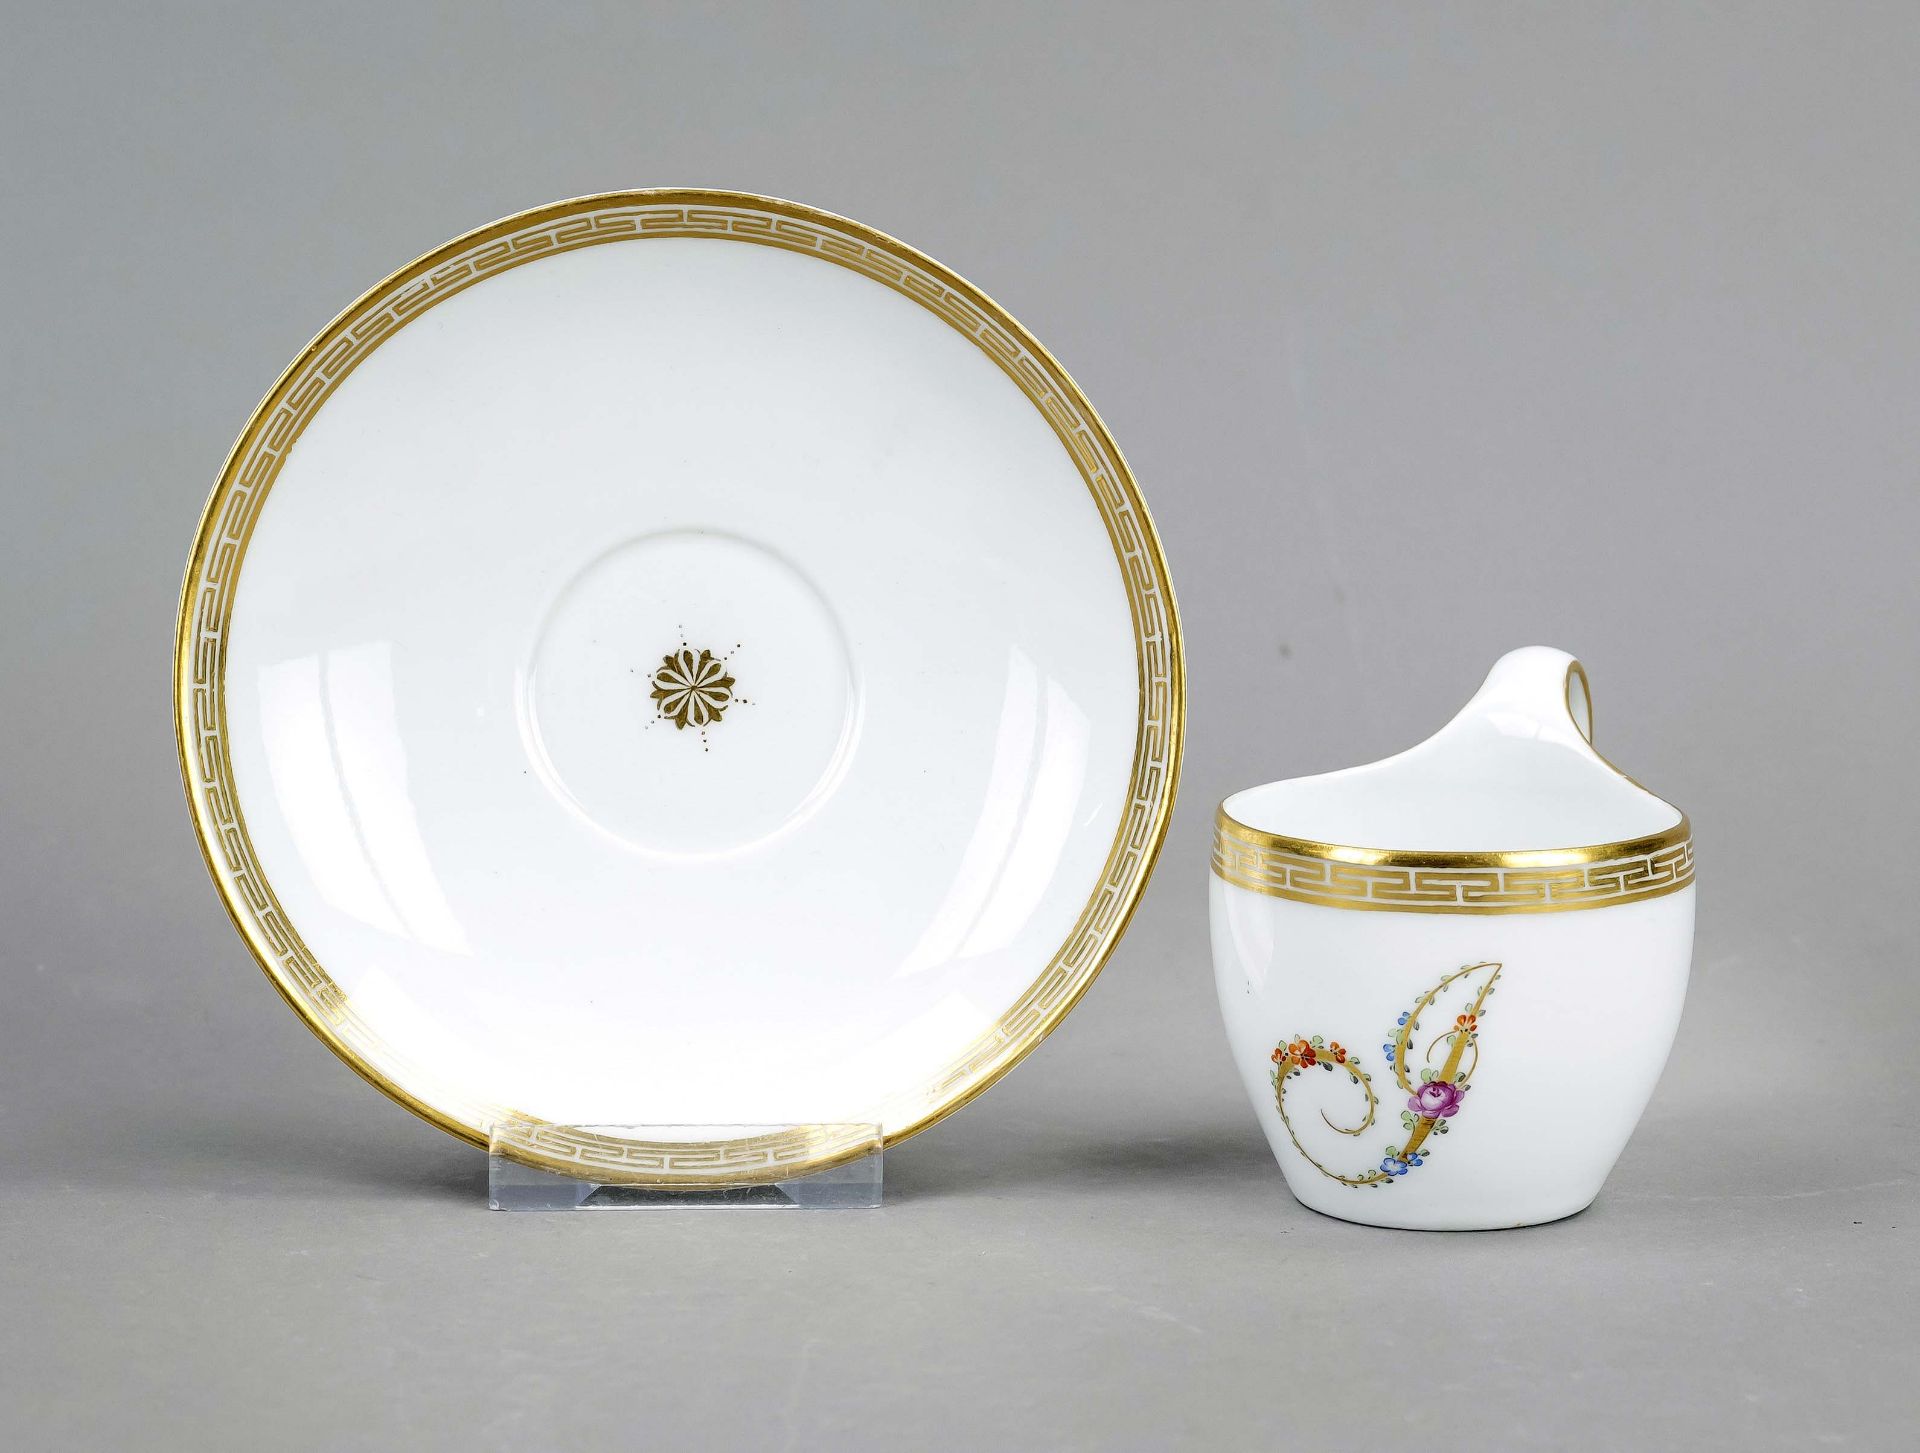 Cup and saucer, KPM Berlin, mark 1780-1800, 1st choice, campanile form with raised handle, the front